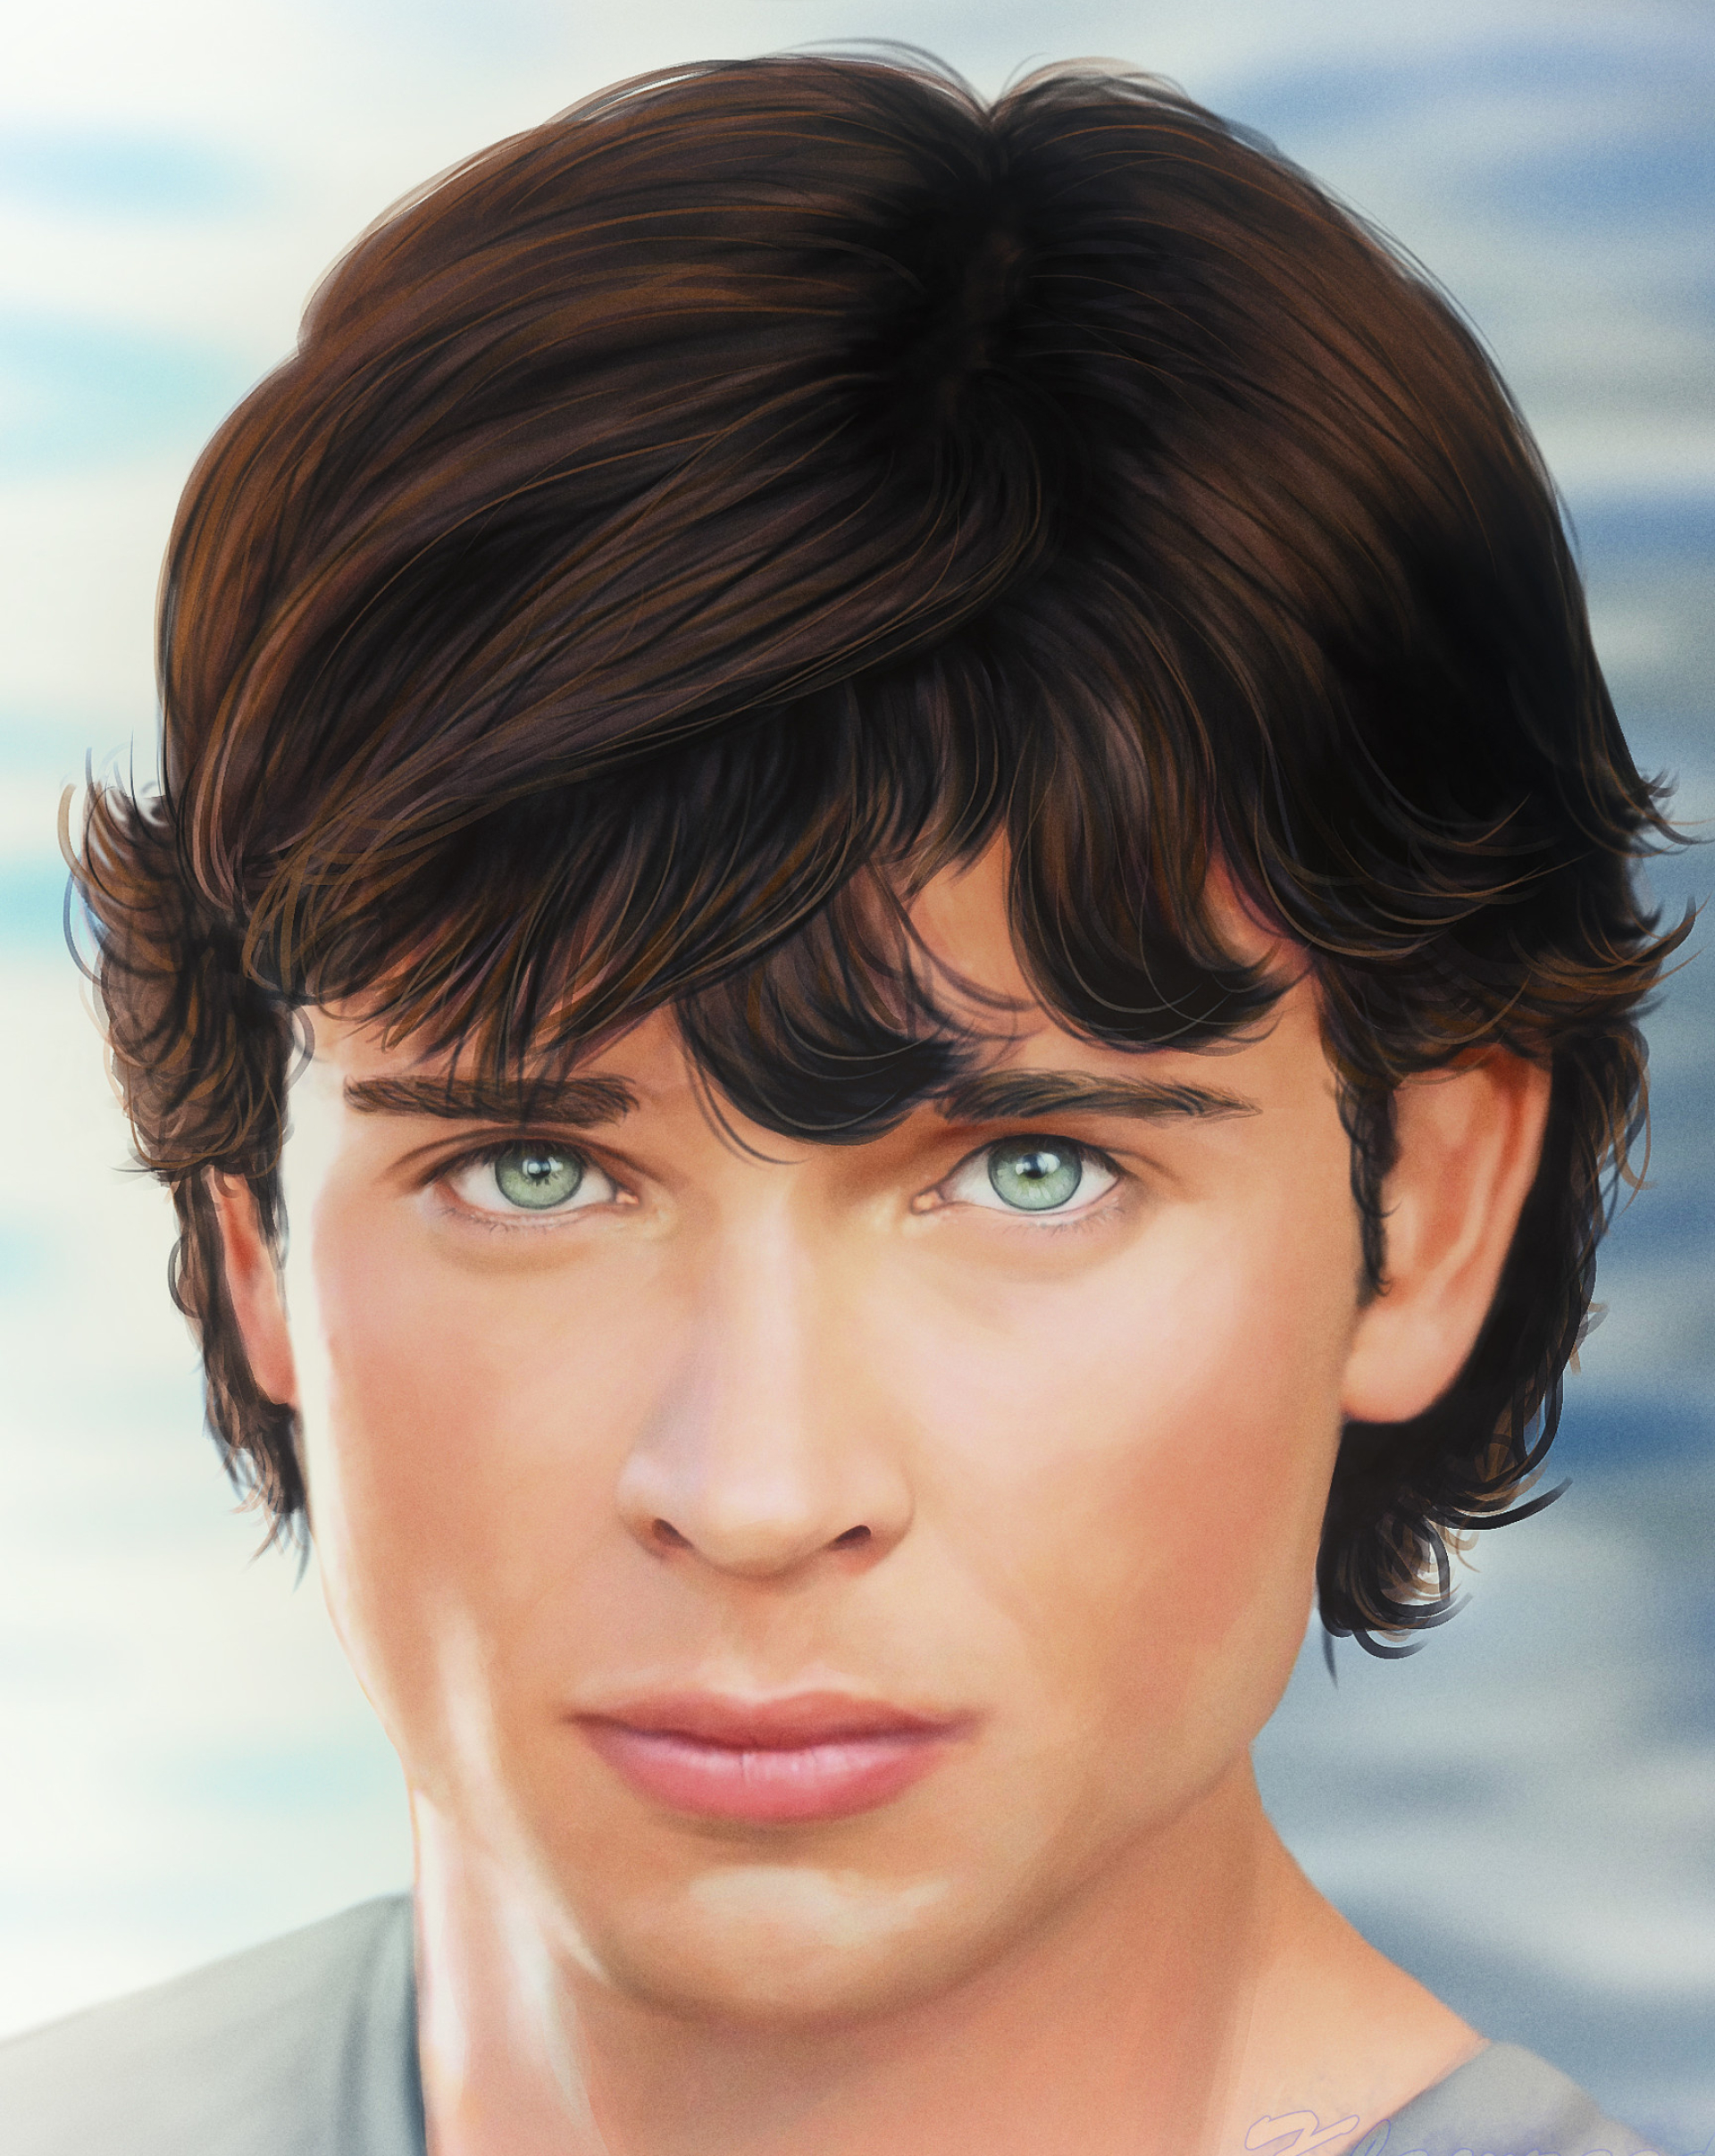 Tom Welling movies, Smallville star, Action thriller, Deep Six, 1920x2420 HD Handy